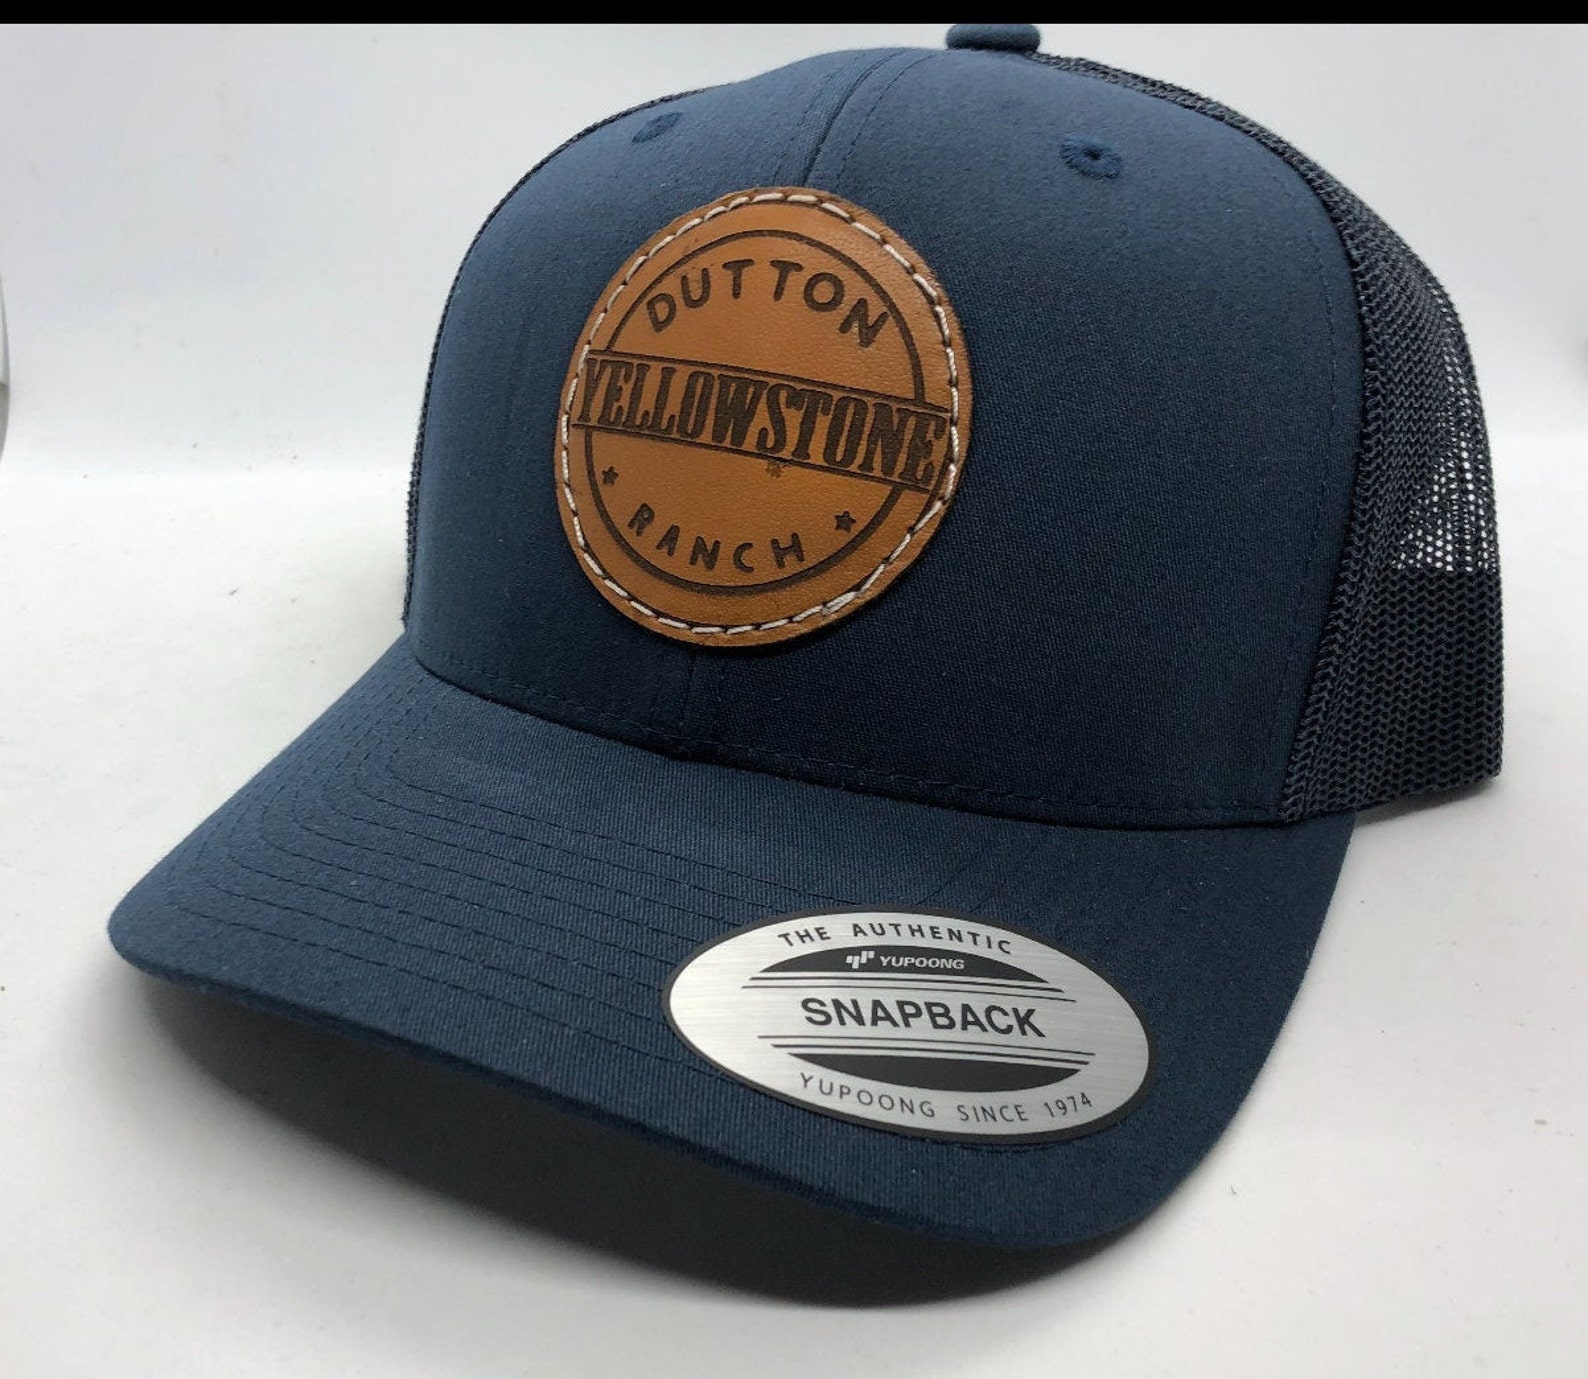 Yellowstone Dutton Ranch Hat Authentic Snapback Navy Round | Etsy